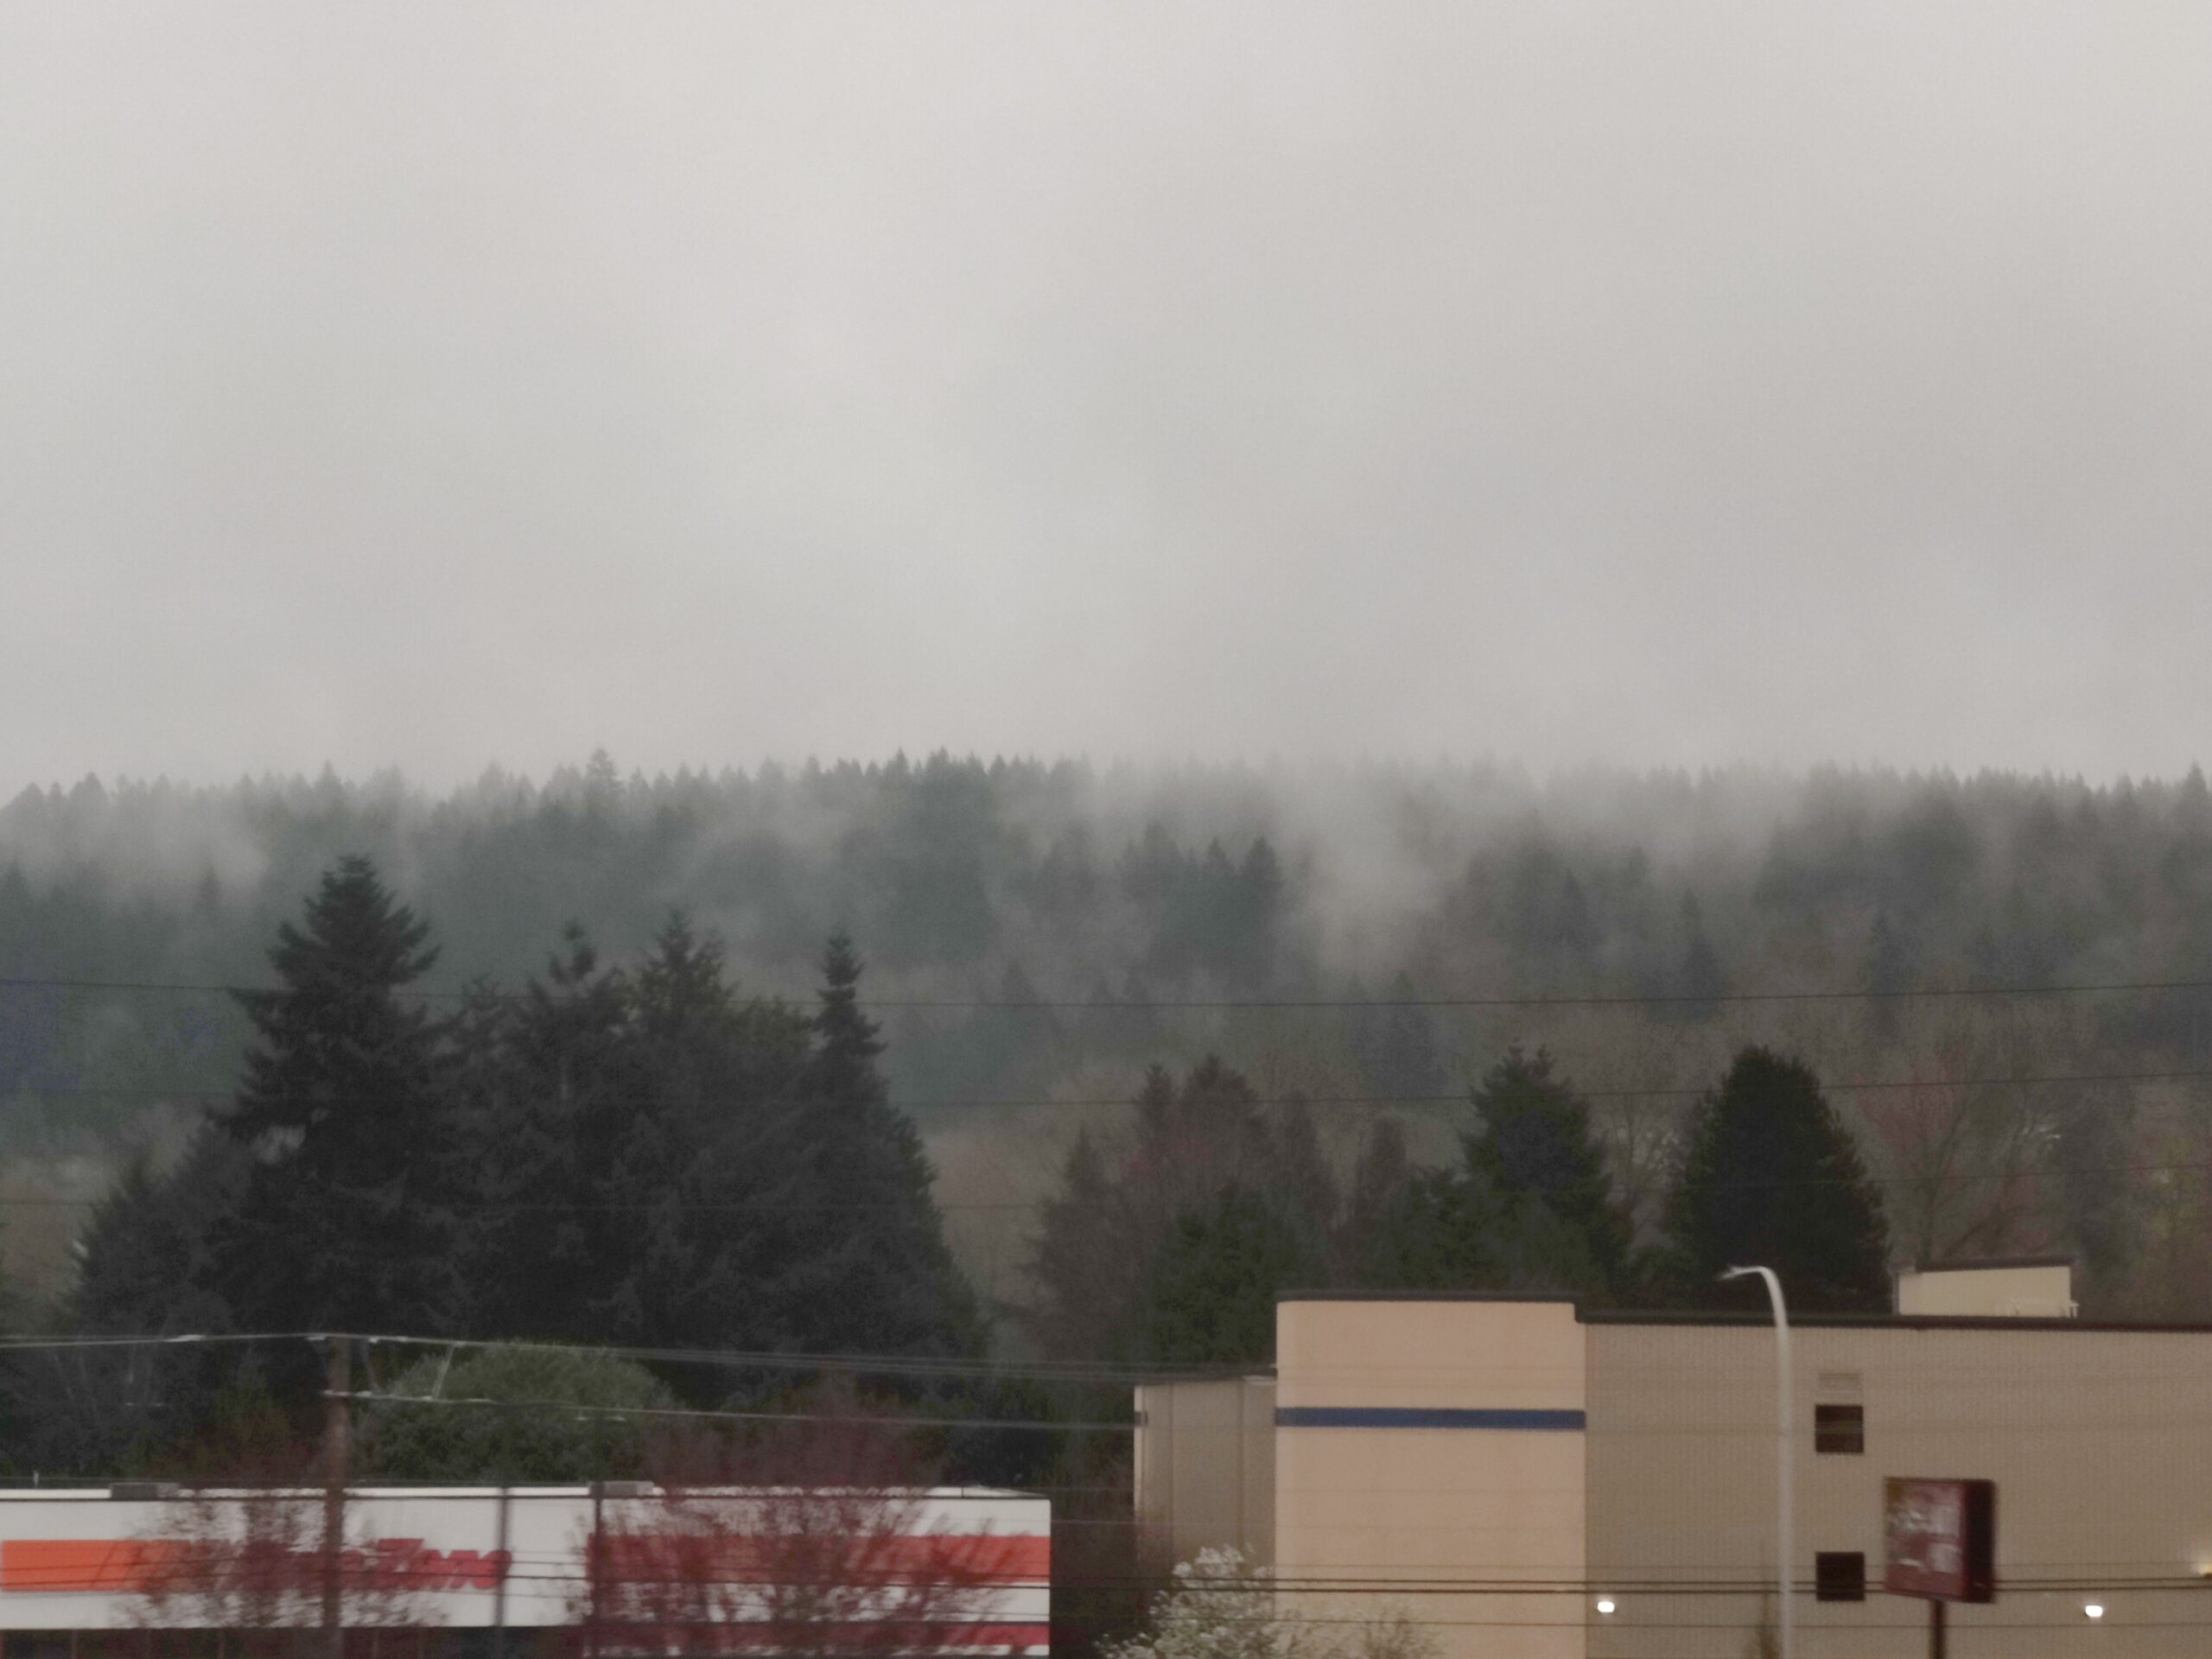 Grey clouds, with a line of mist-shrouded trees about half-way up the picture. There is a row of conifer trees in the middle distance. In the foreground are a white building with orange lettering on the left, with telephone wires above it, and some grey buildings on the right.